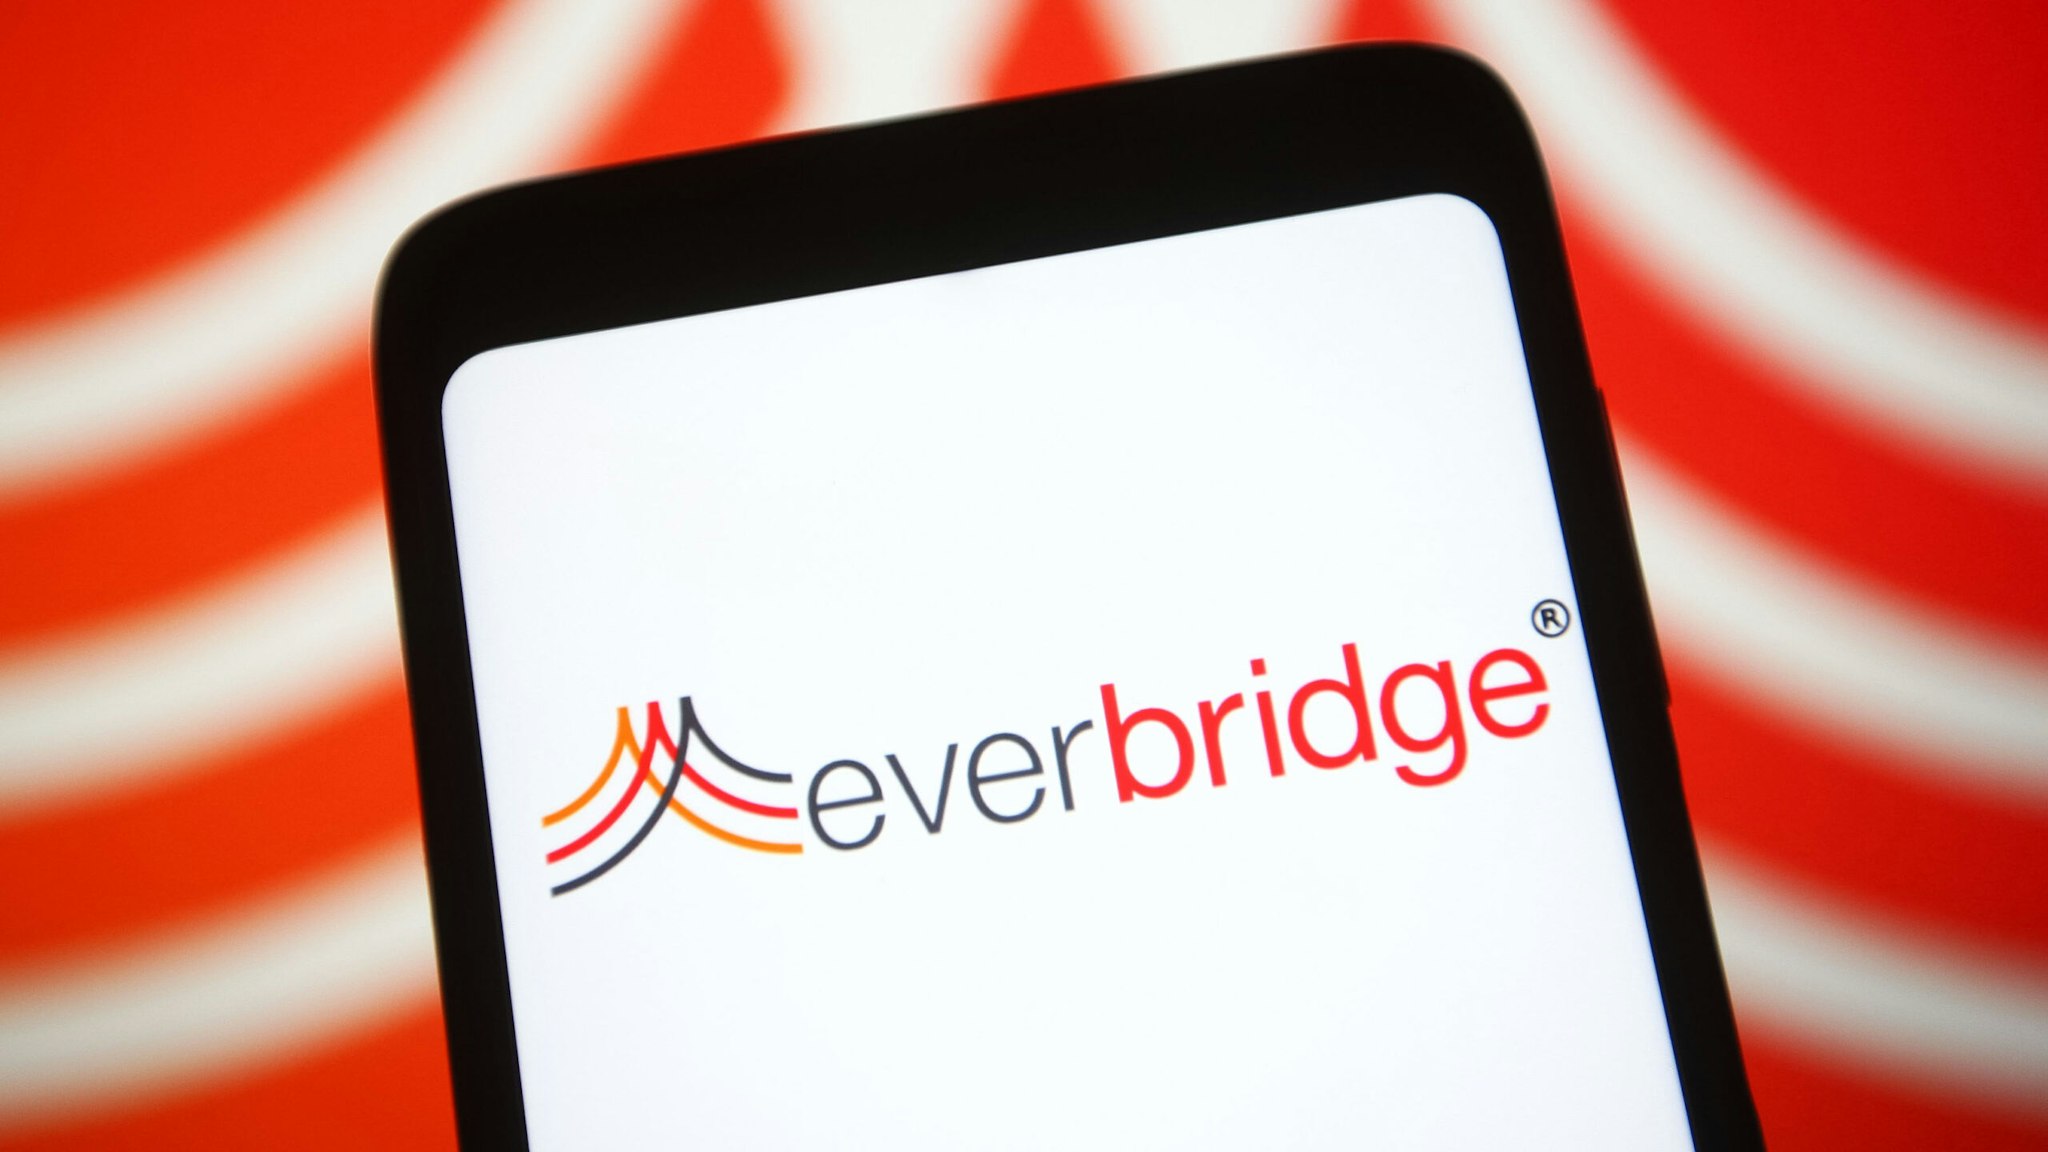 UKRAINE - 2021/06/21: In this photo illustration an Everbridge logo of a software company is seen on a smartphone screen.